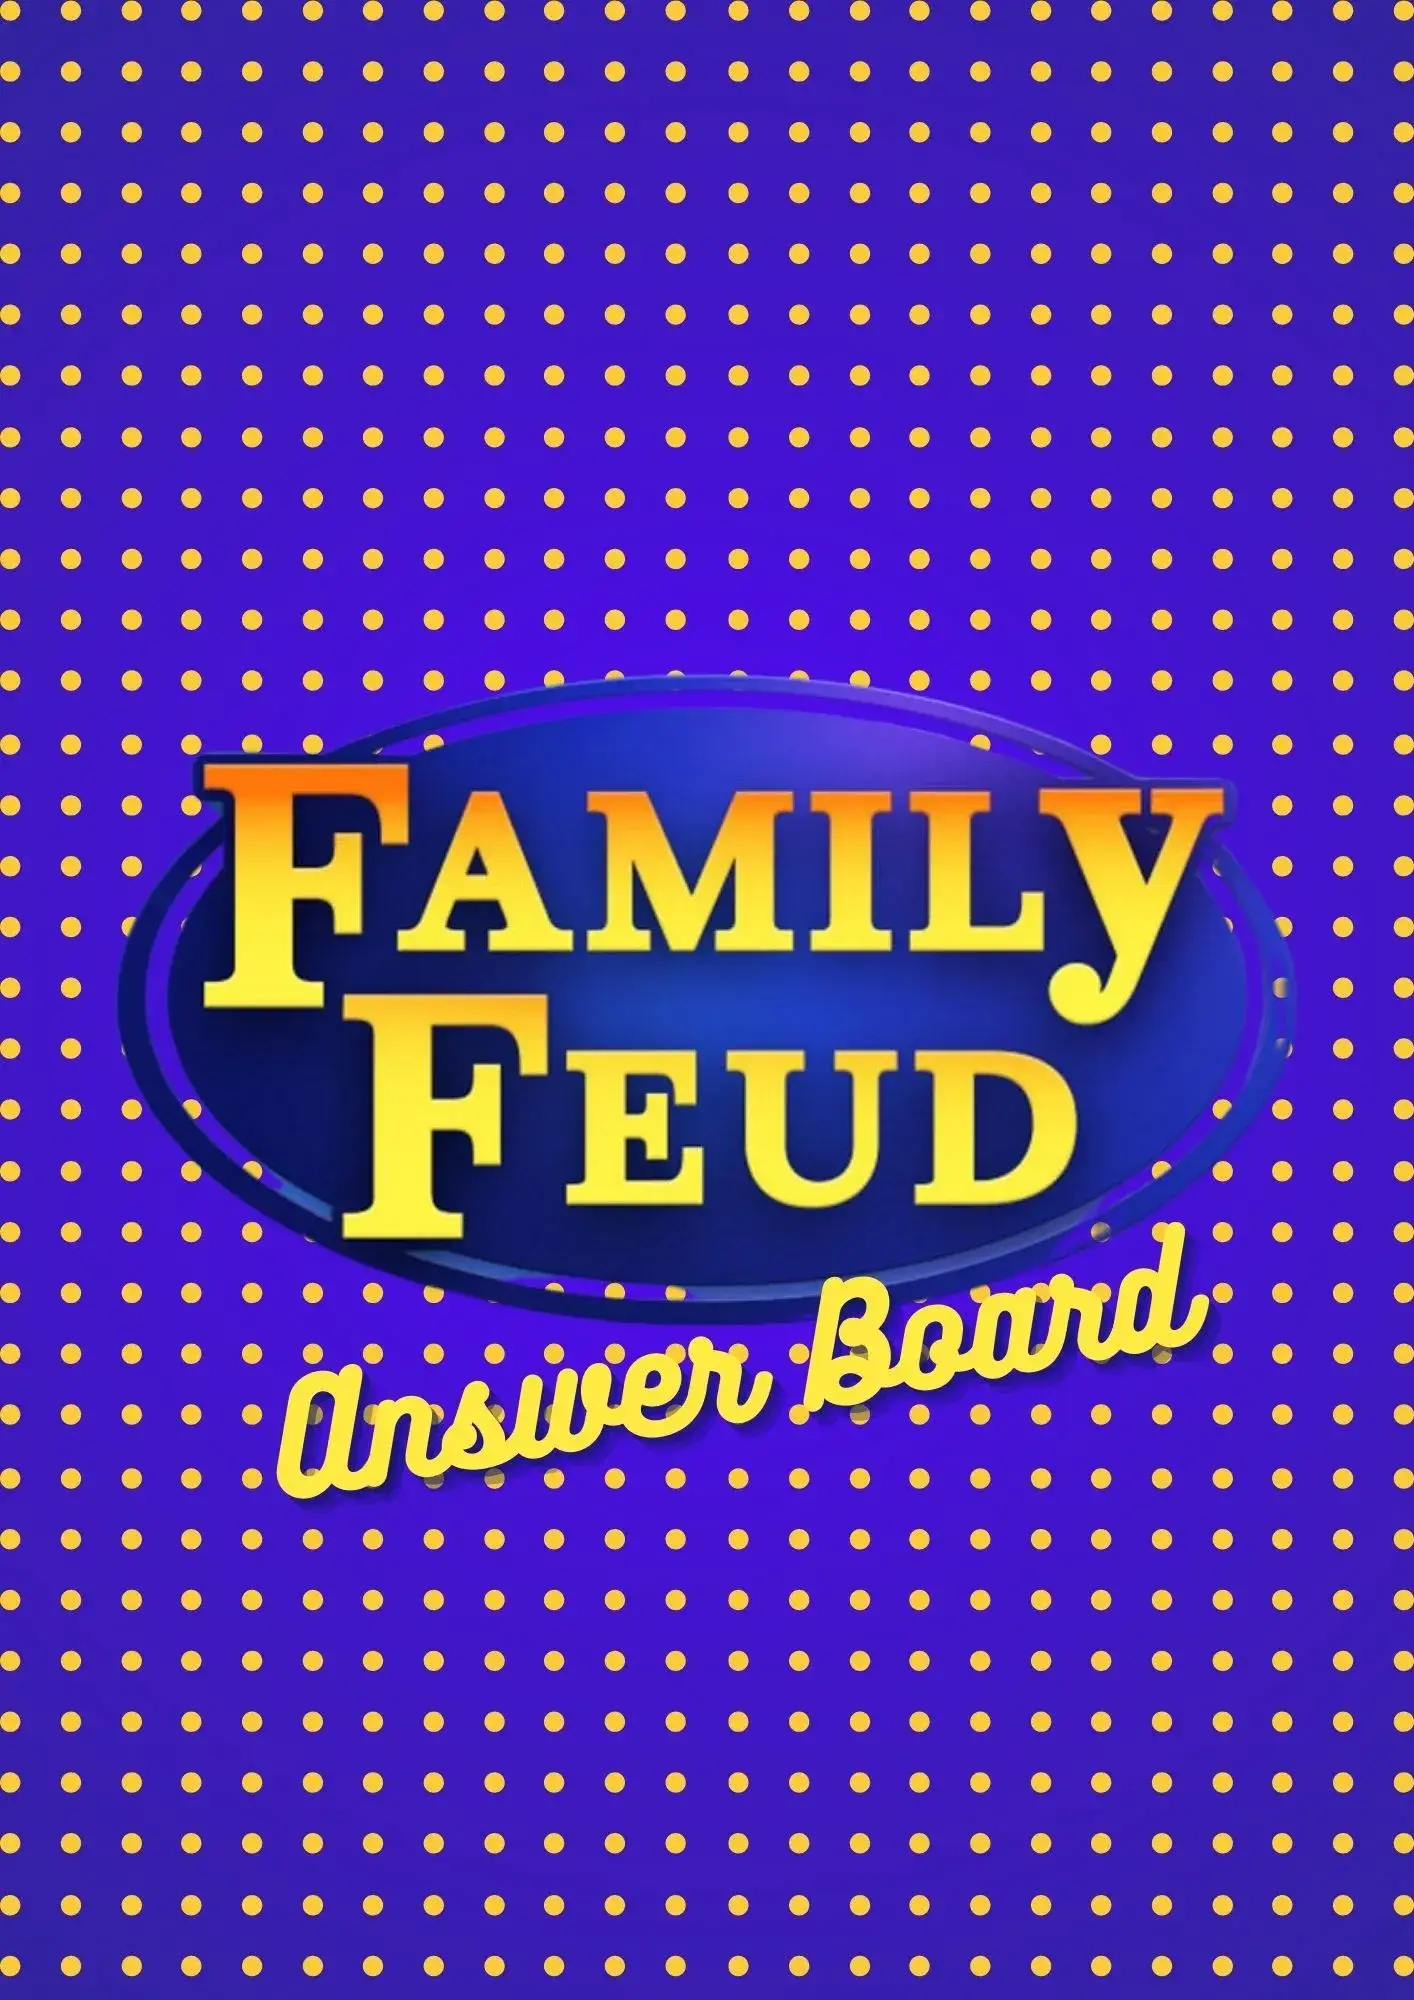 Family Feud Answer Board Template